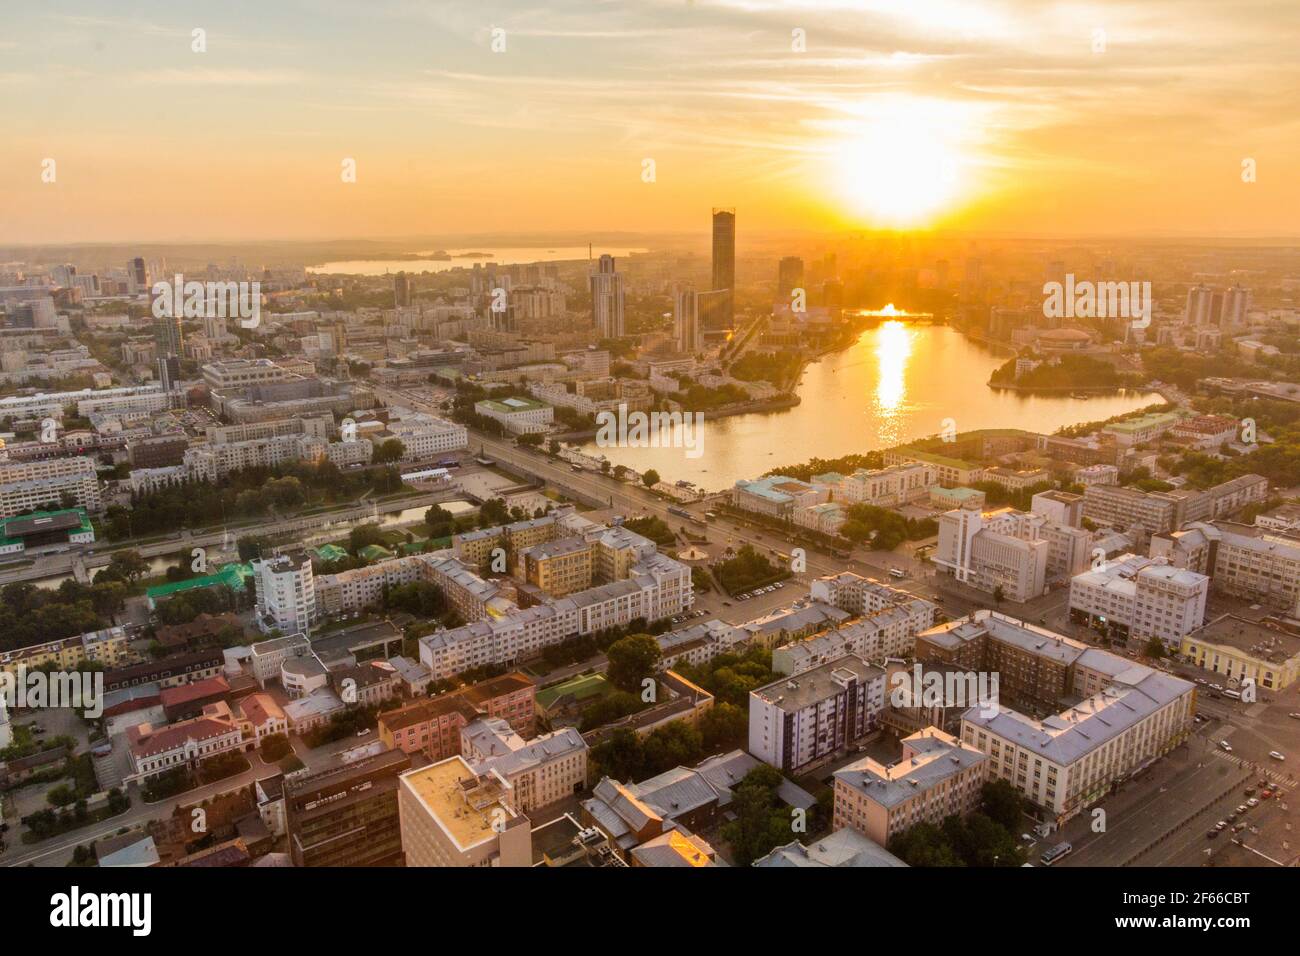 Aerial view of Yekaterinburg during sunset, Russia Stock Photo